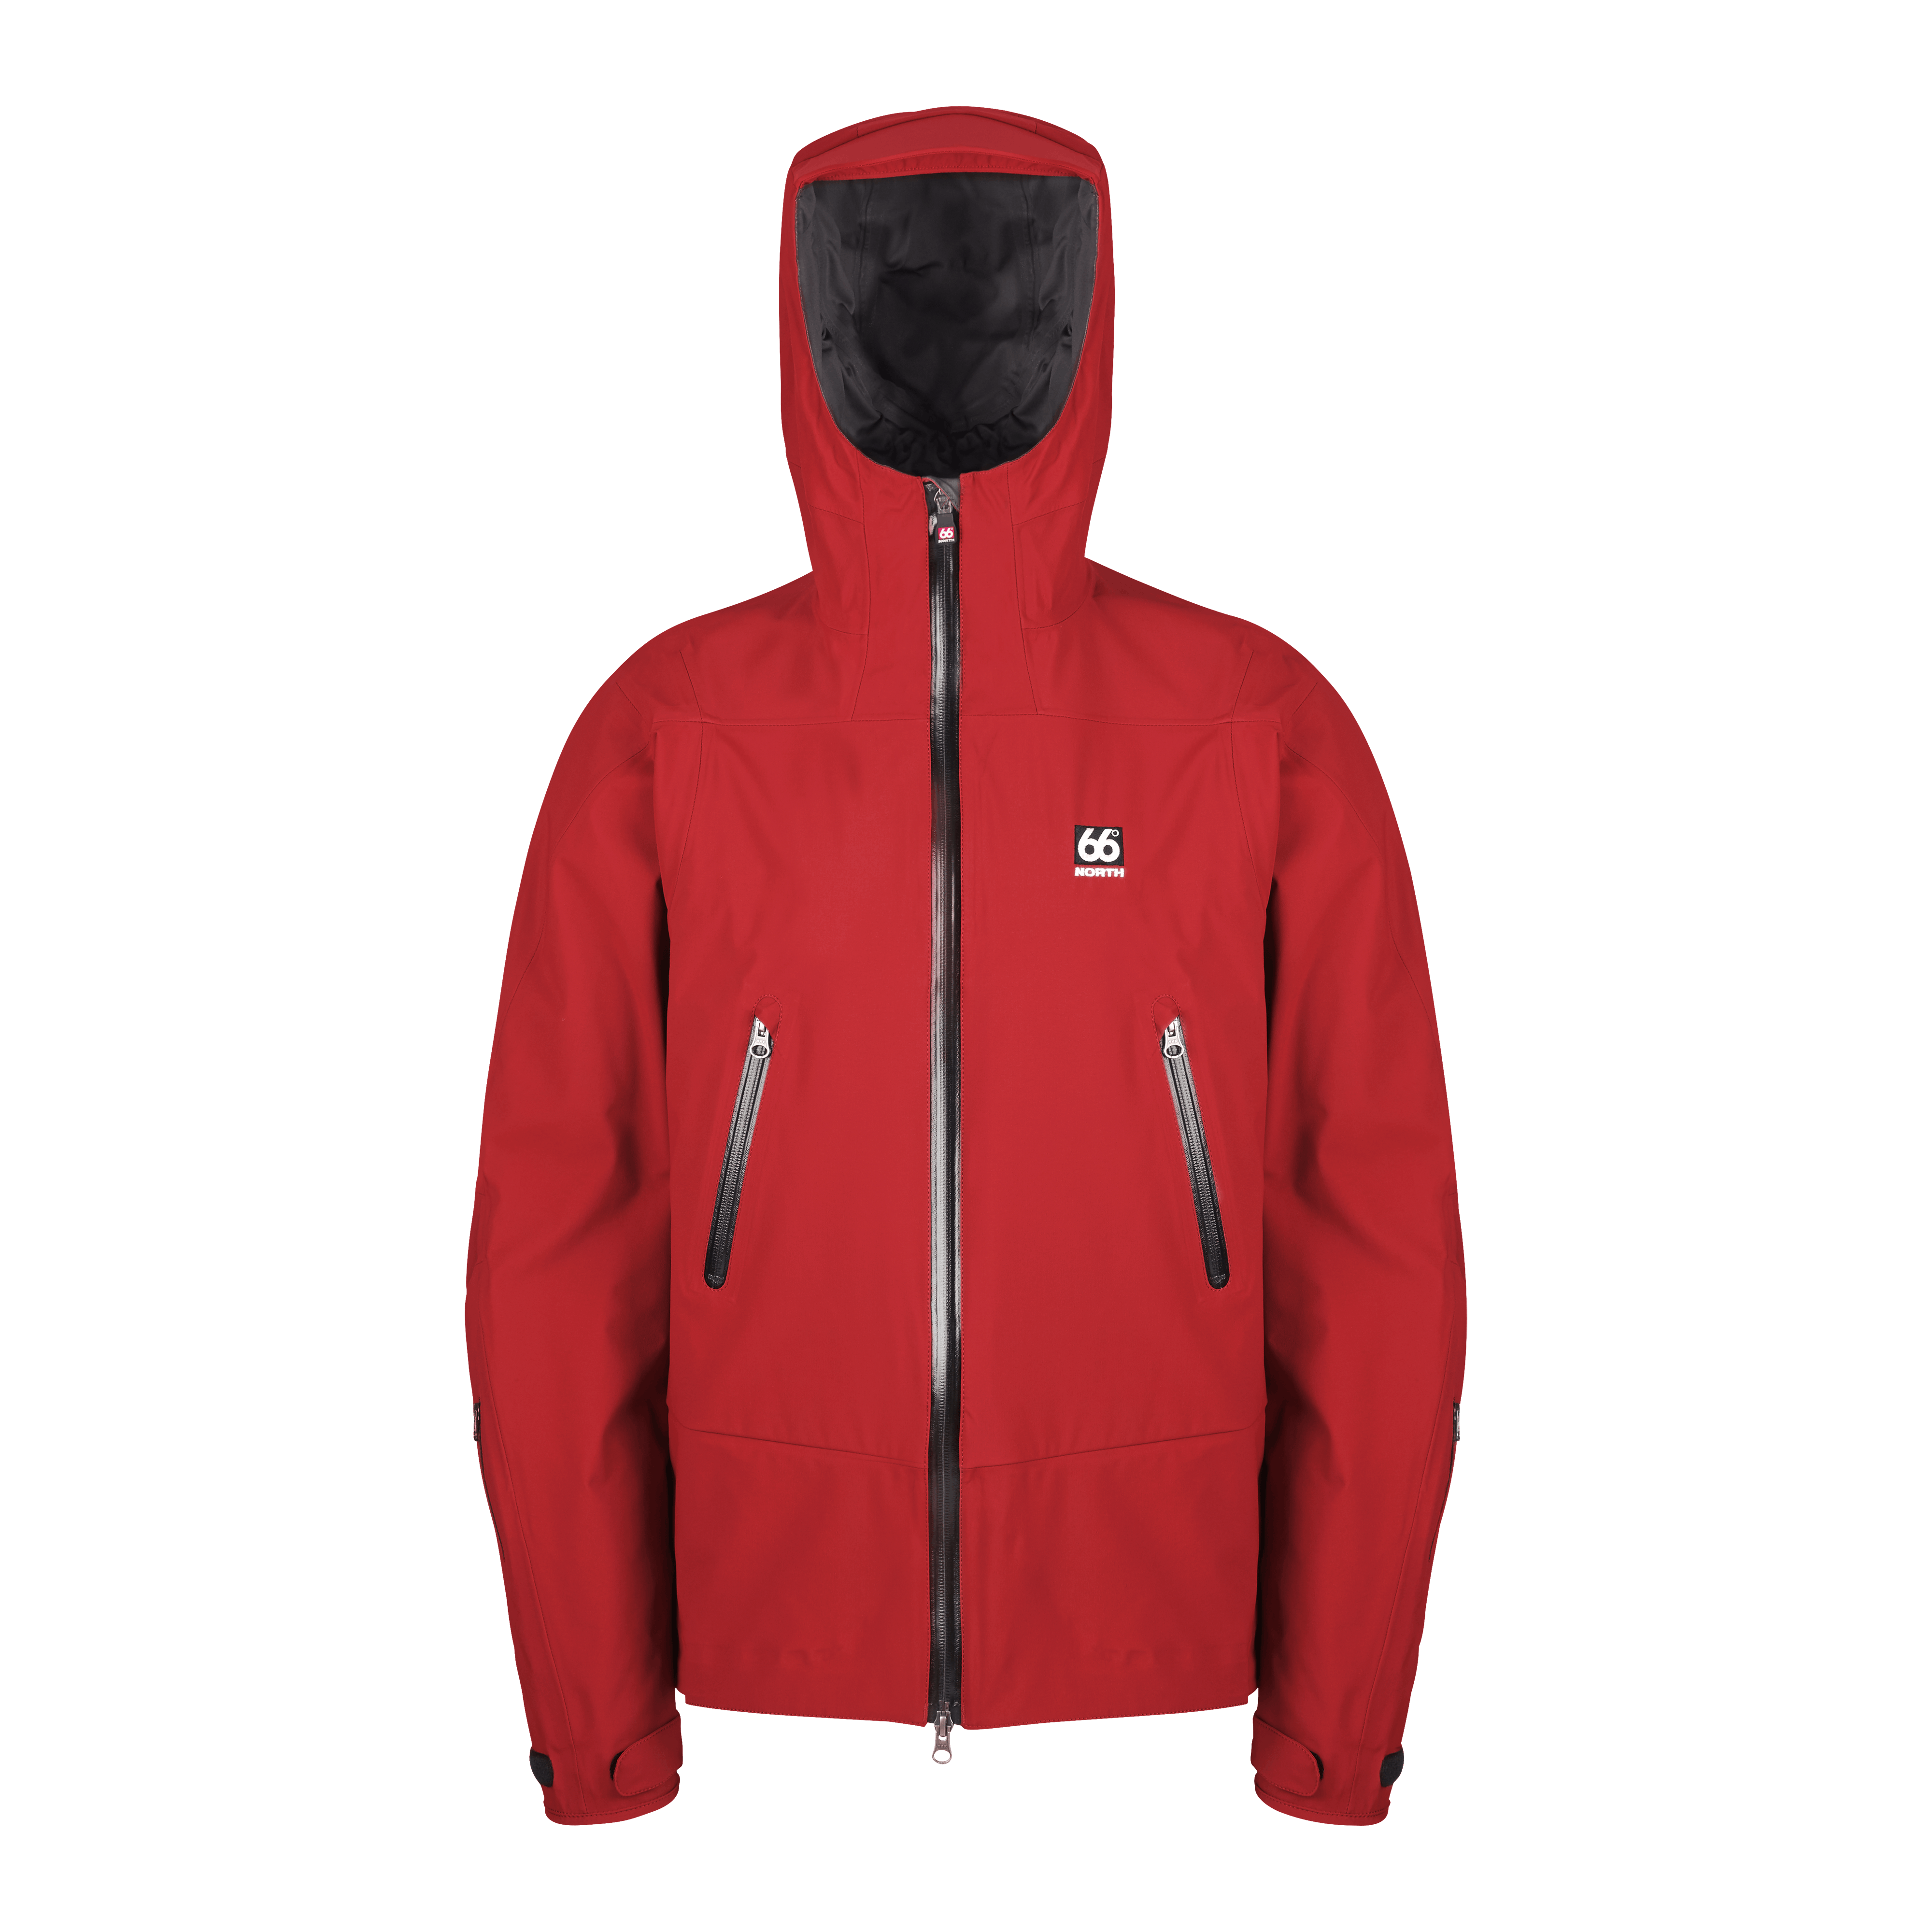 66 degrees north snaefell parka